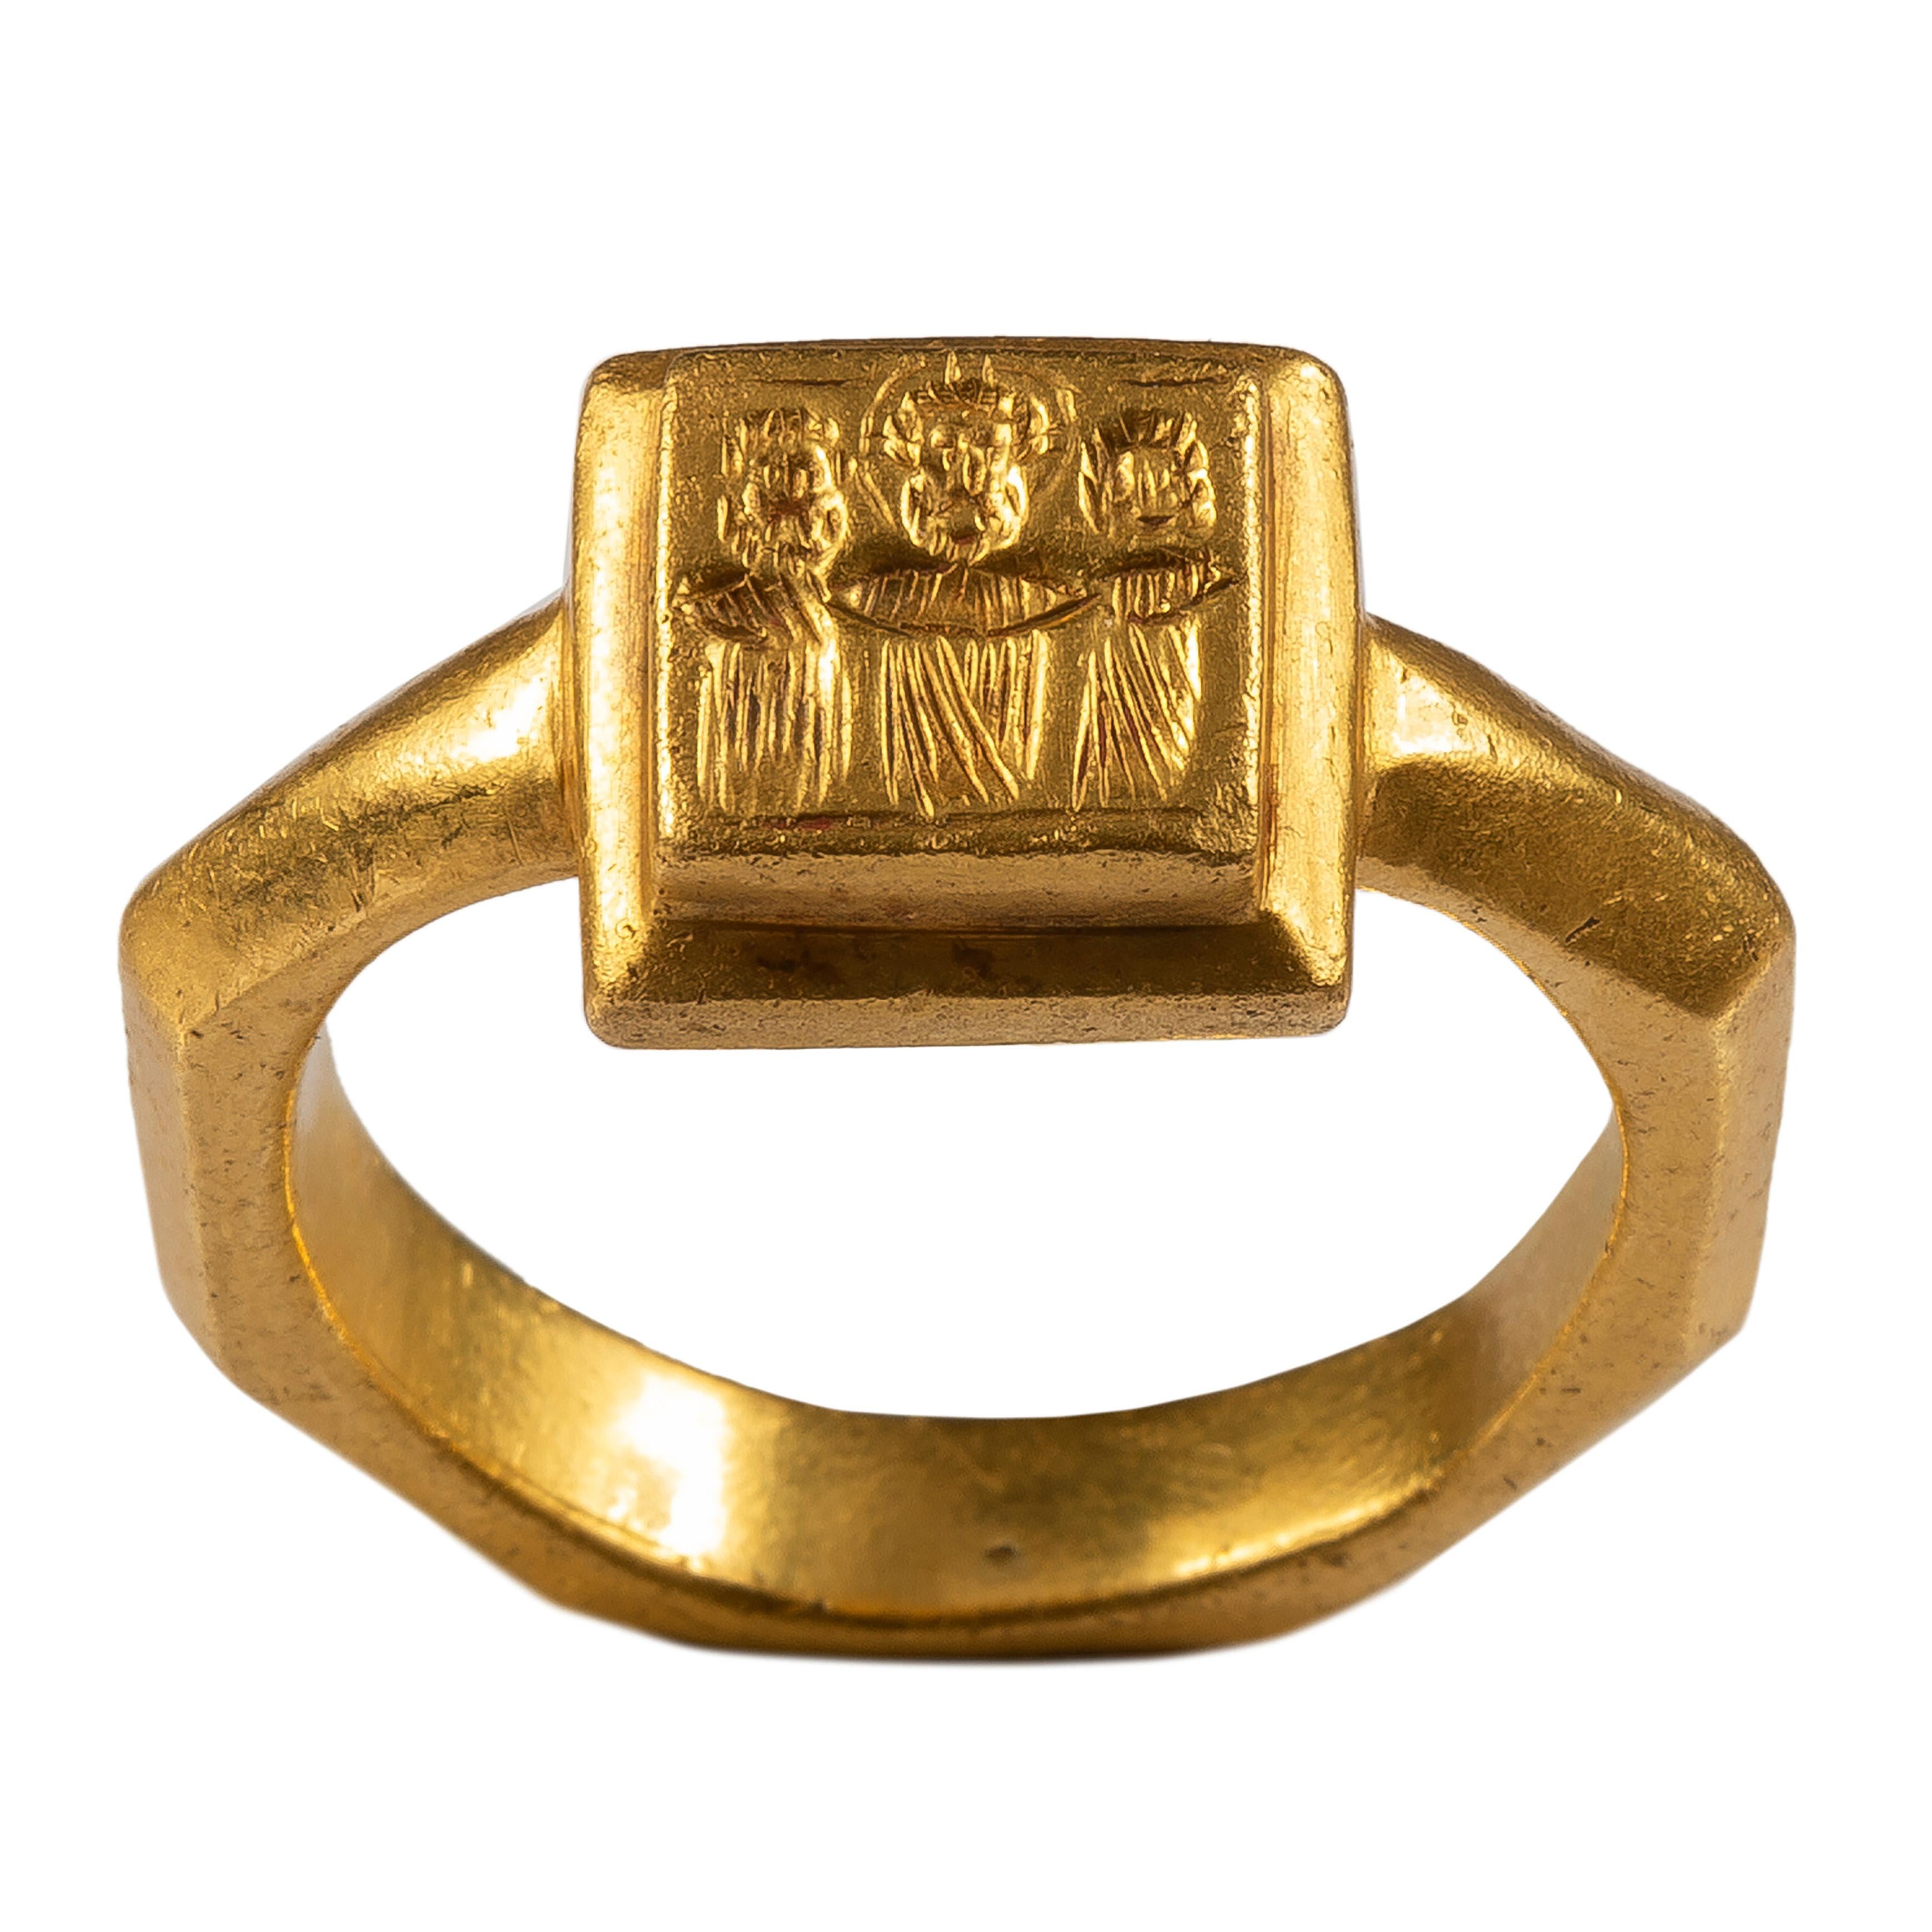 Byzantine Marriage Ring
Byzantine Empire, 6th – 7th century AD
Gold
Weight 15.8 gr; circumference 60.98 mm; US size 9 1/2; UK size S ¾

Heavy gold ring with an octagonal hoop set with a rectangular-shaped bezel. The hoop is composed of a central rib